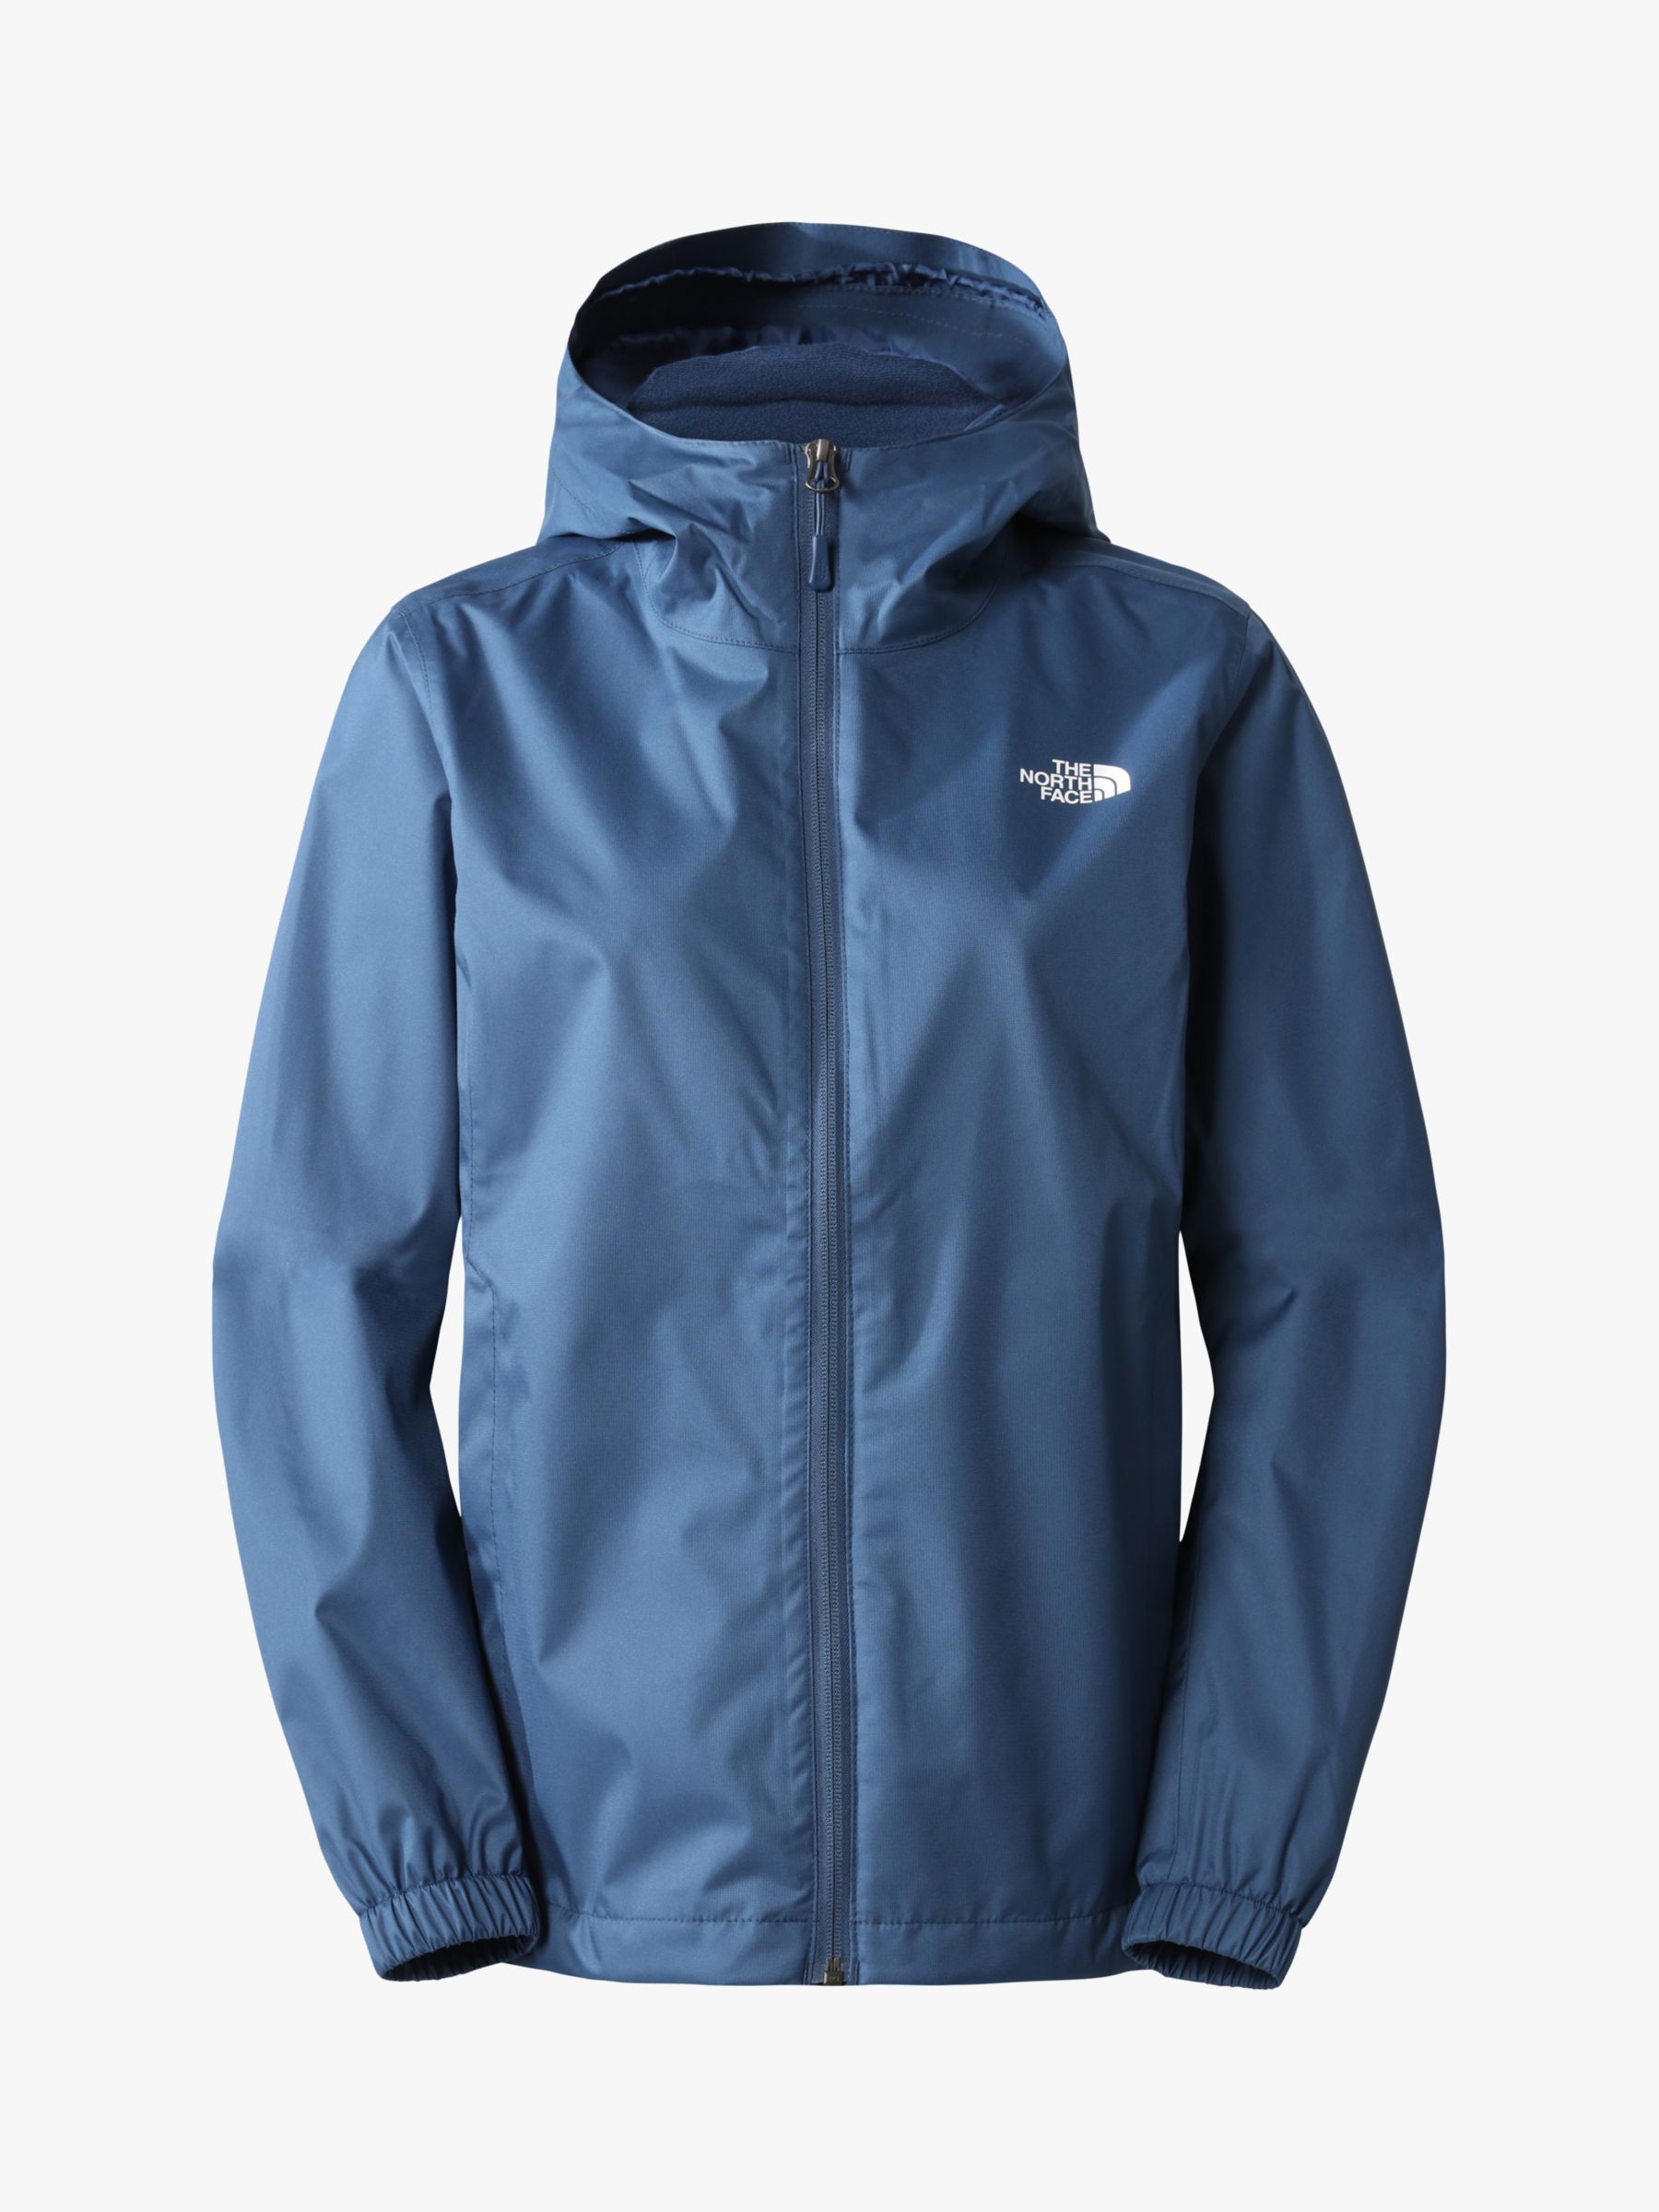 The North Face Women's Quest Hooded Jacket, Blue, M